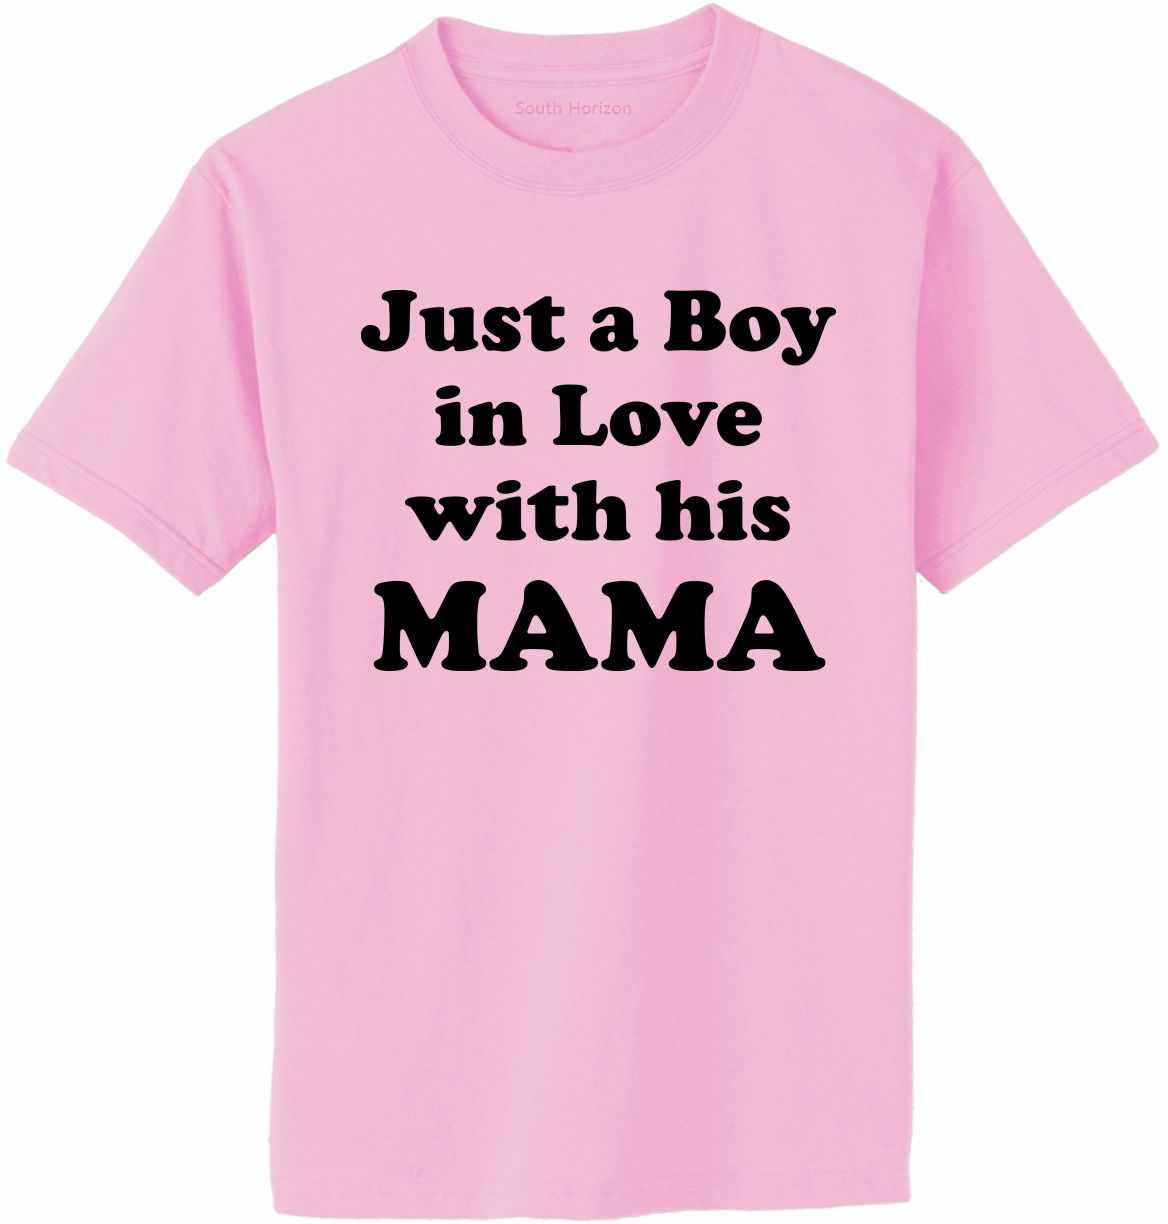 Just a Boy in Love with his MAMA Adult T-Shirt (#1097-1)